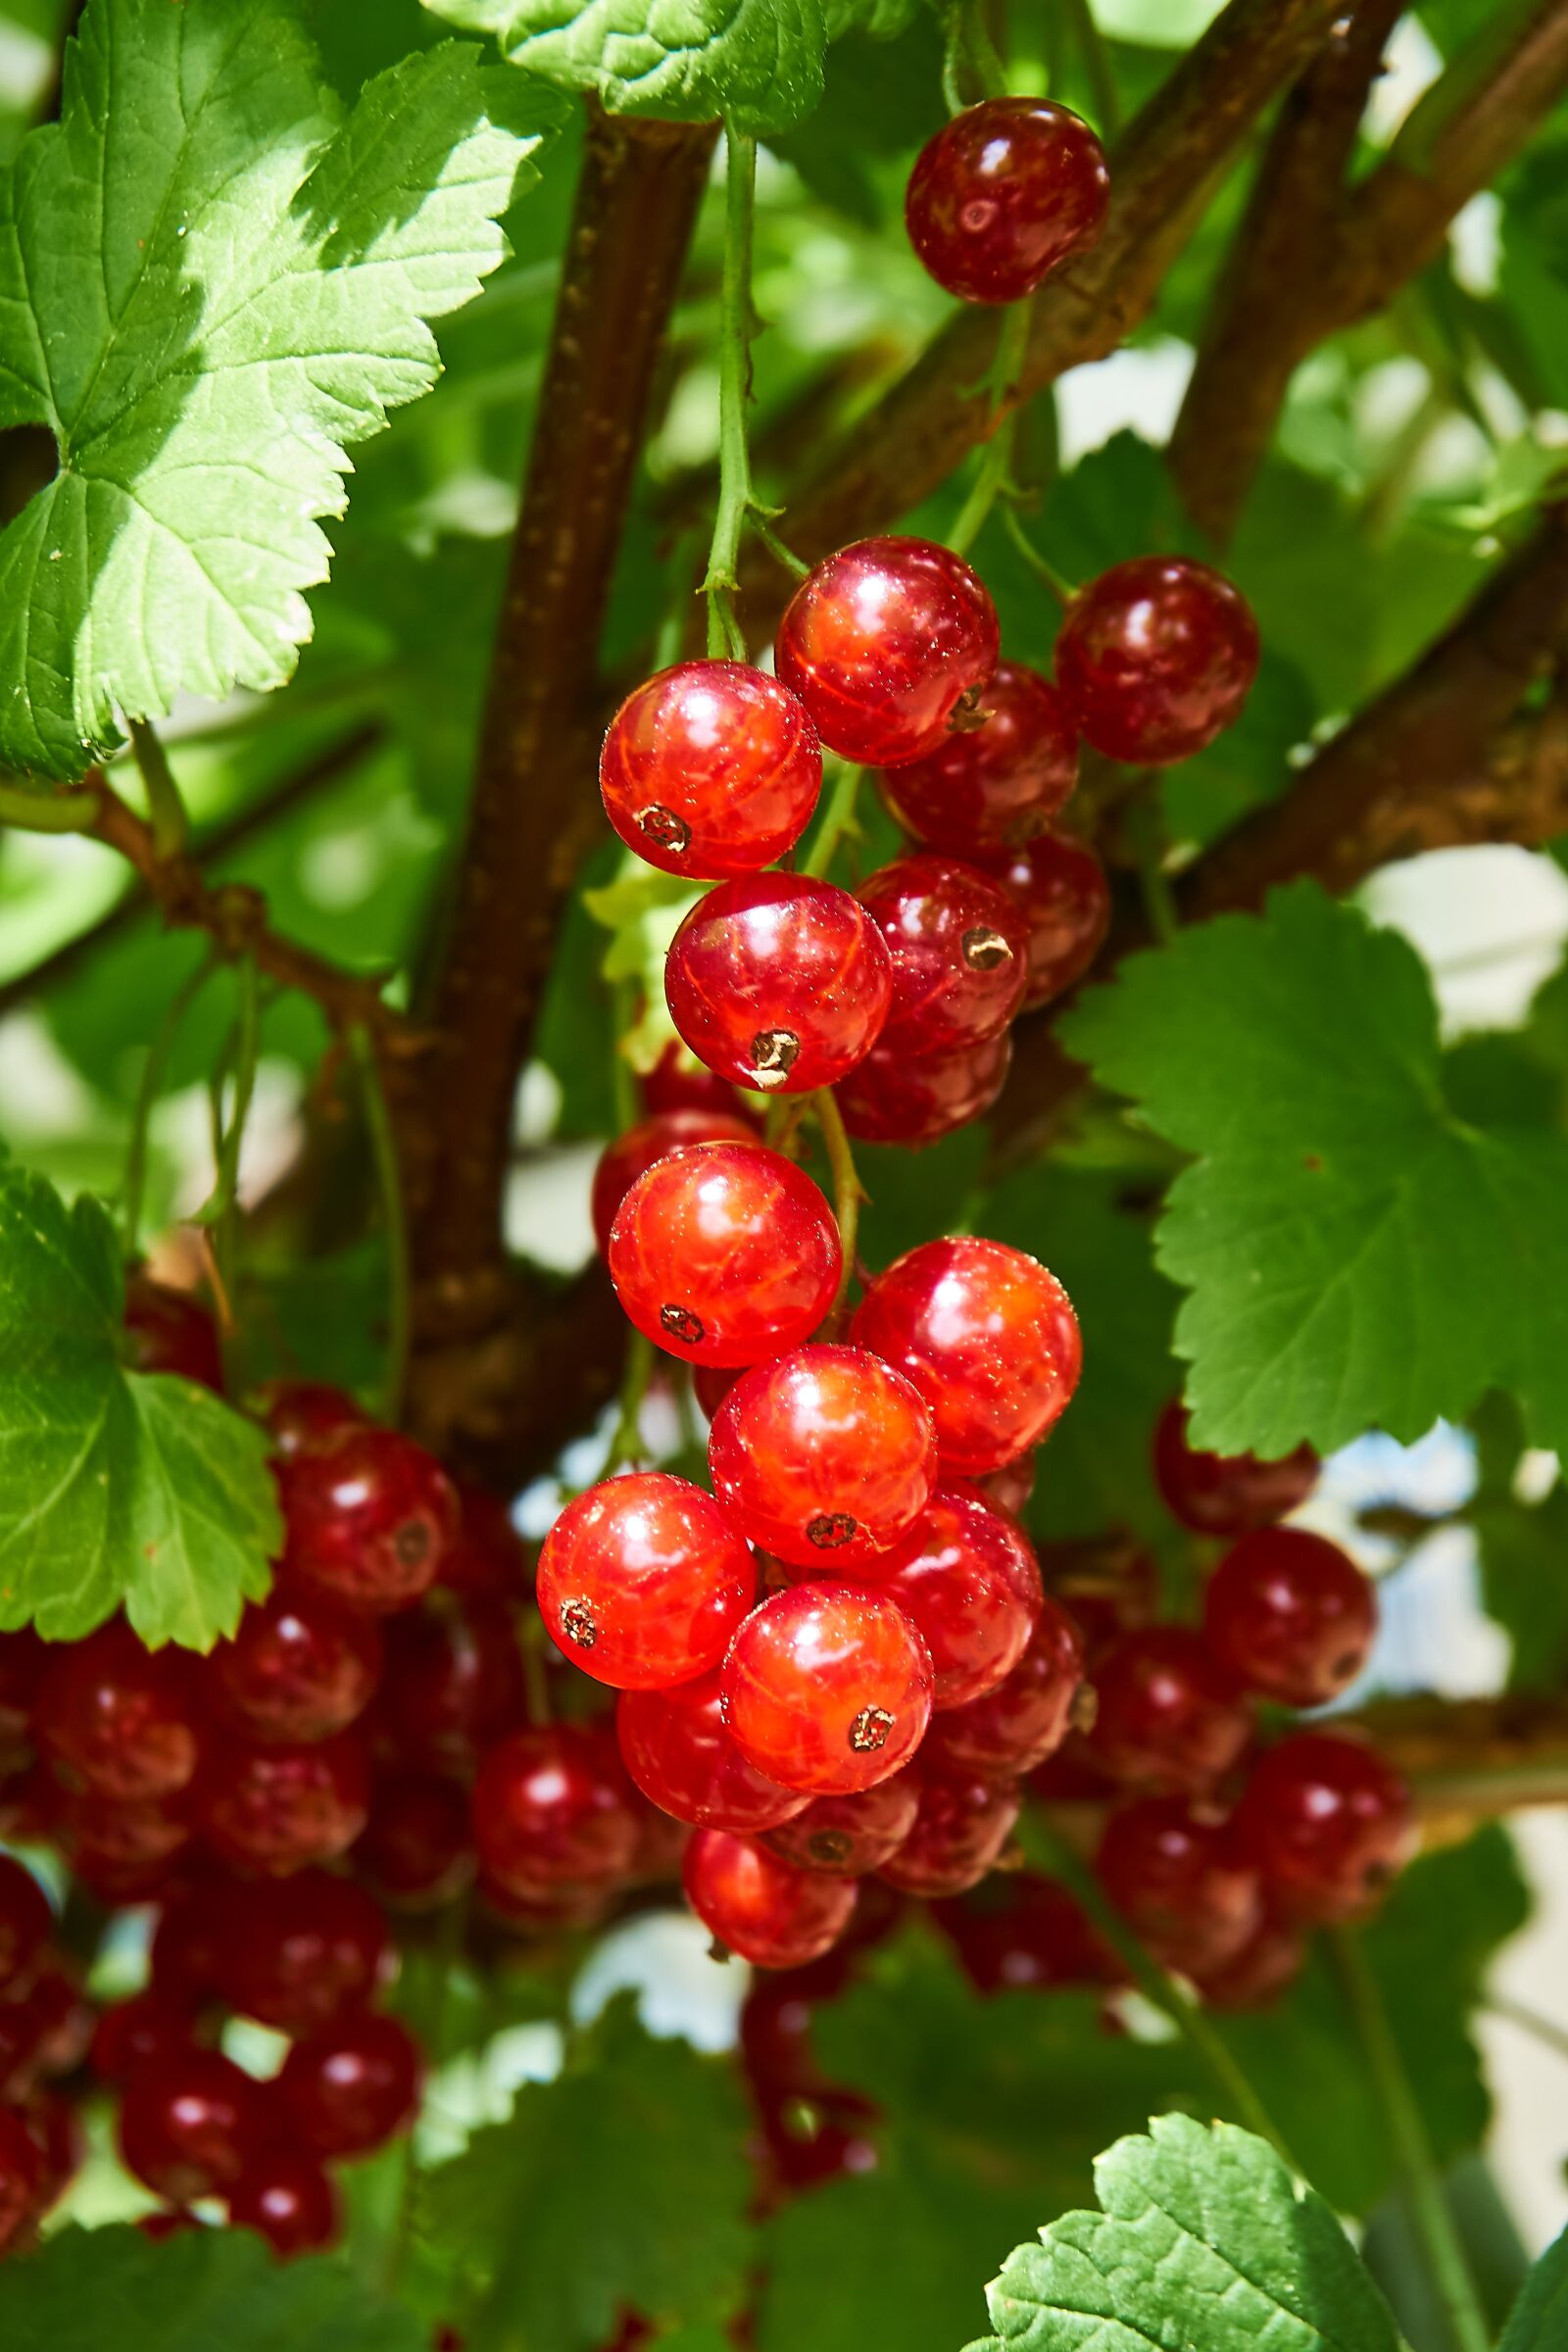 Sony a6000 + Sony E PZ 16-50 mm F3.5-5.6 OSS (SELP1650) sample photo. Currant, berries, ripe photography